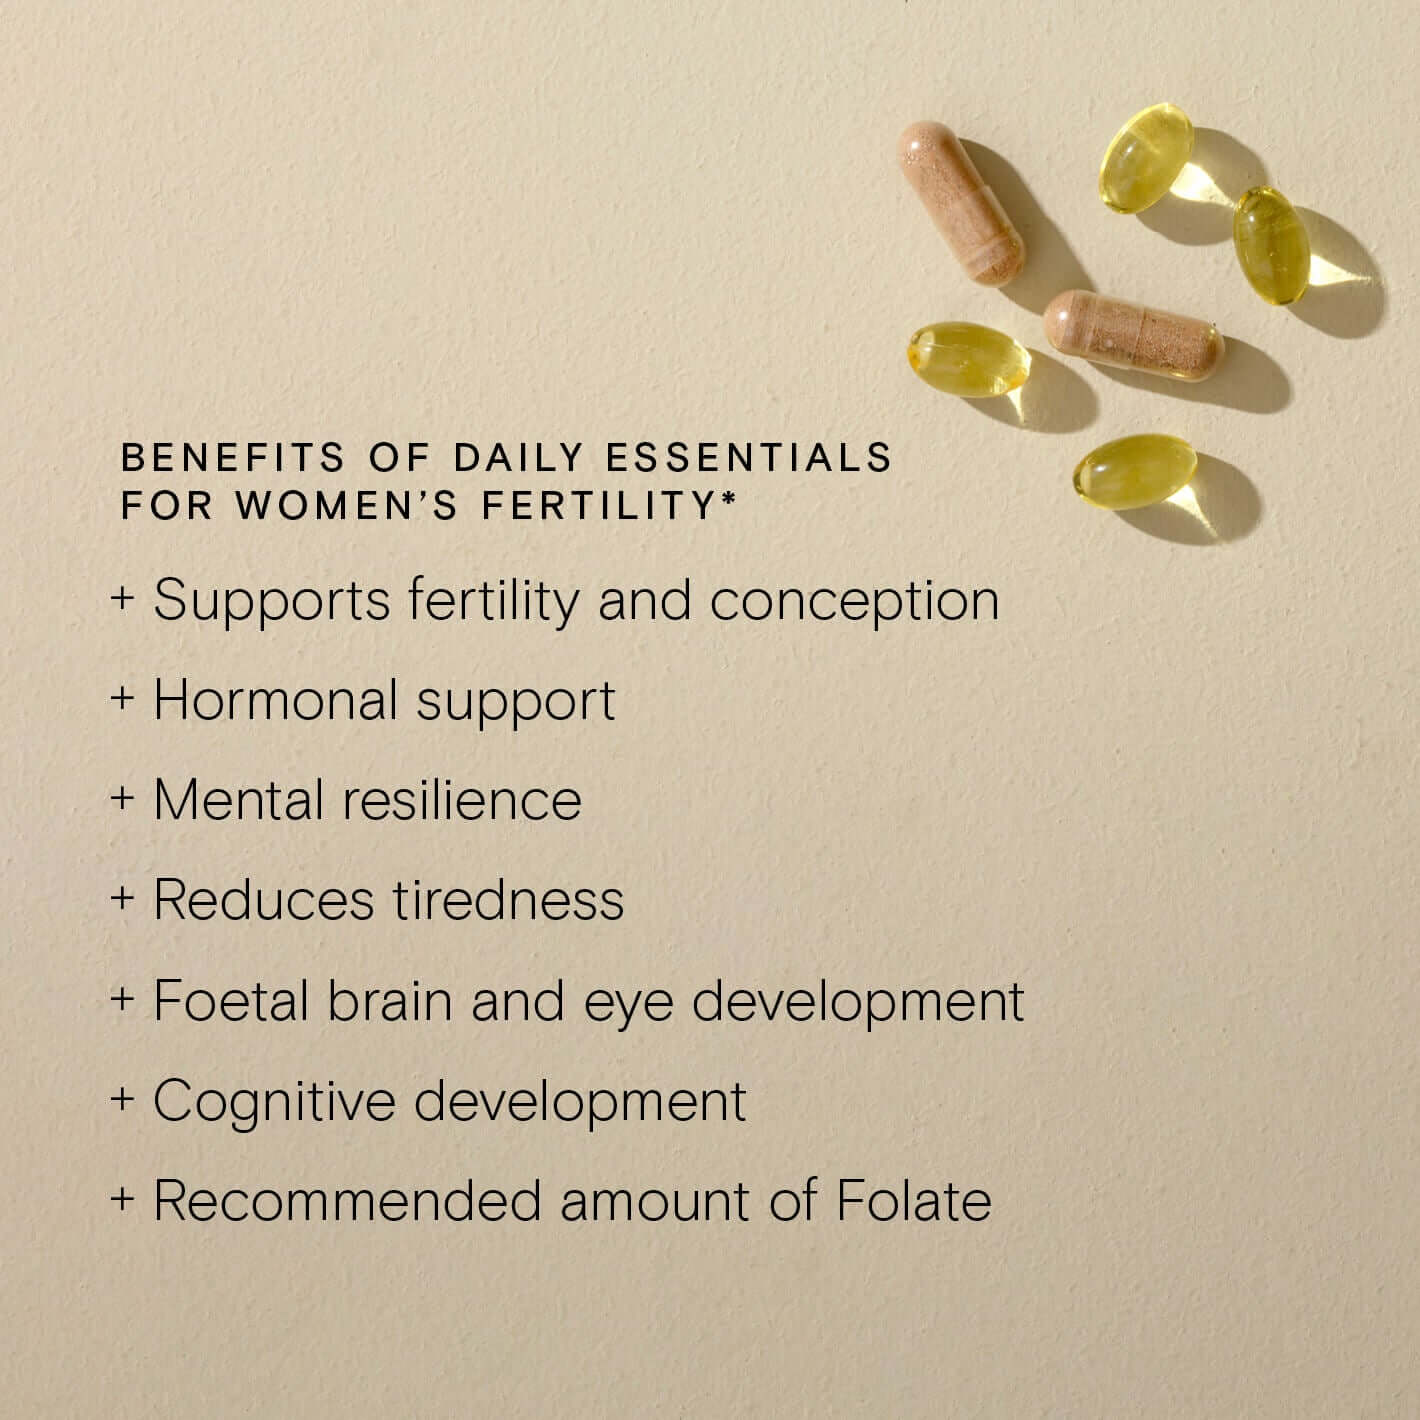 Daily Essentials for Women's Fertility